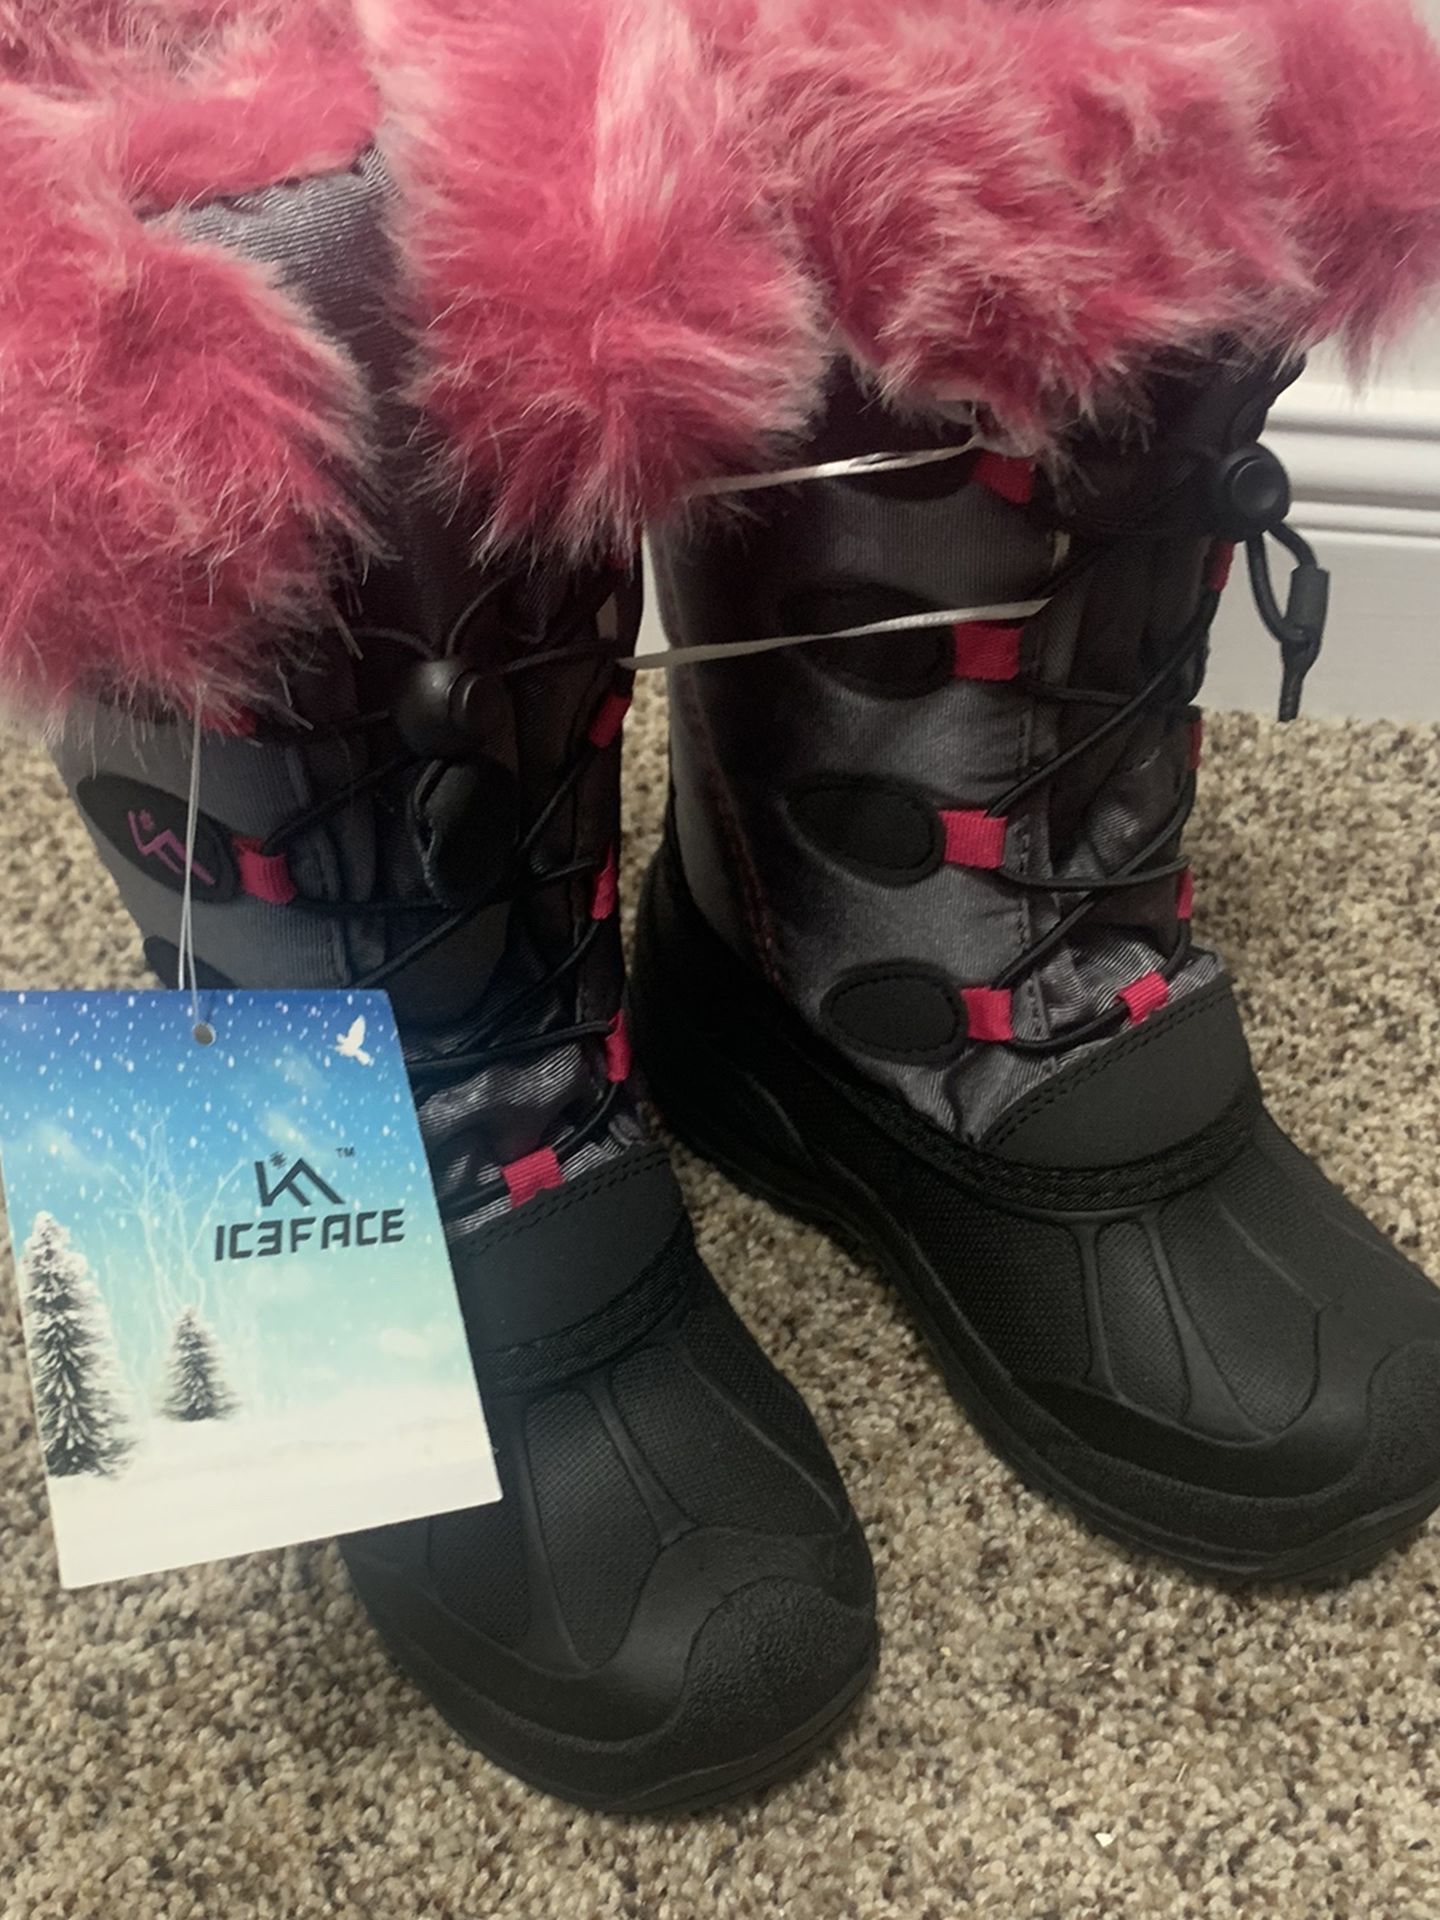 Winter Snow Boots Girls Size 1